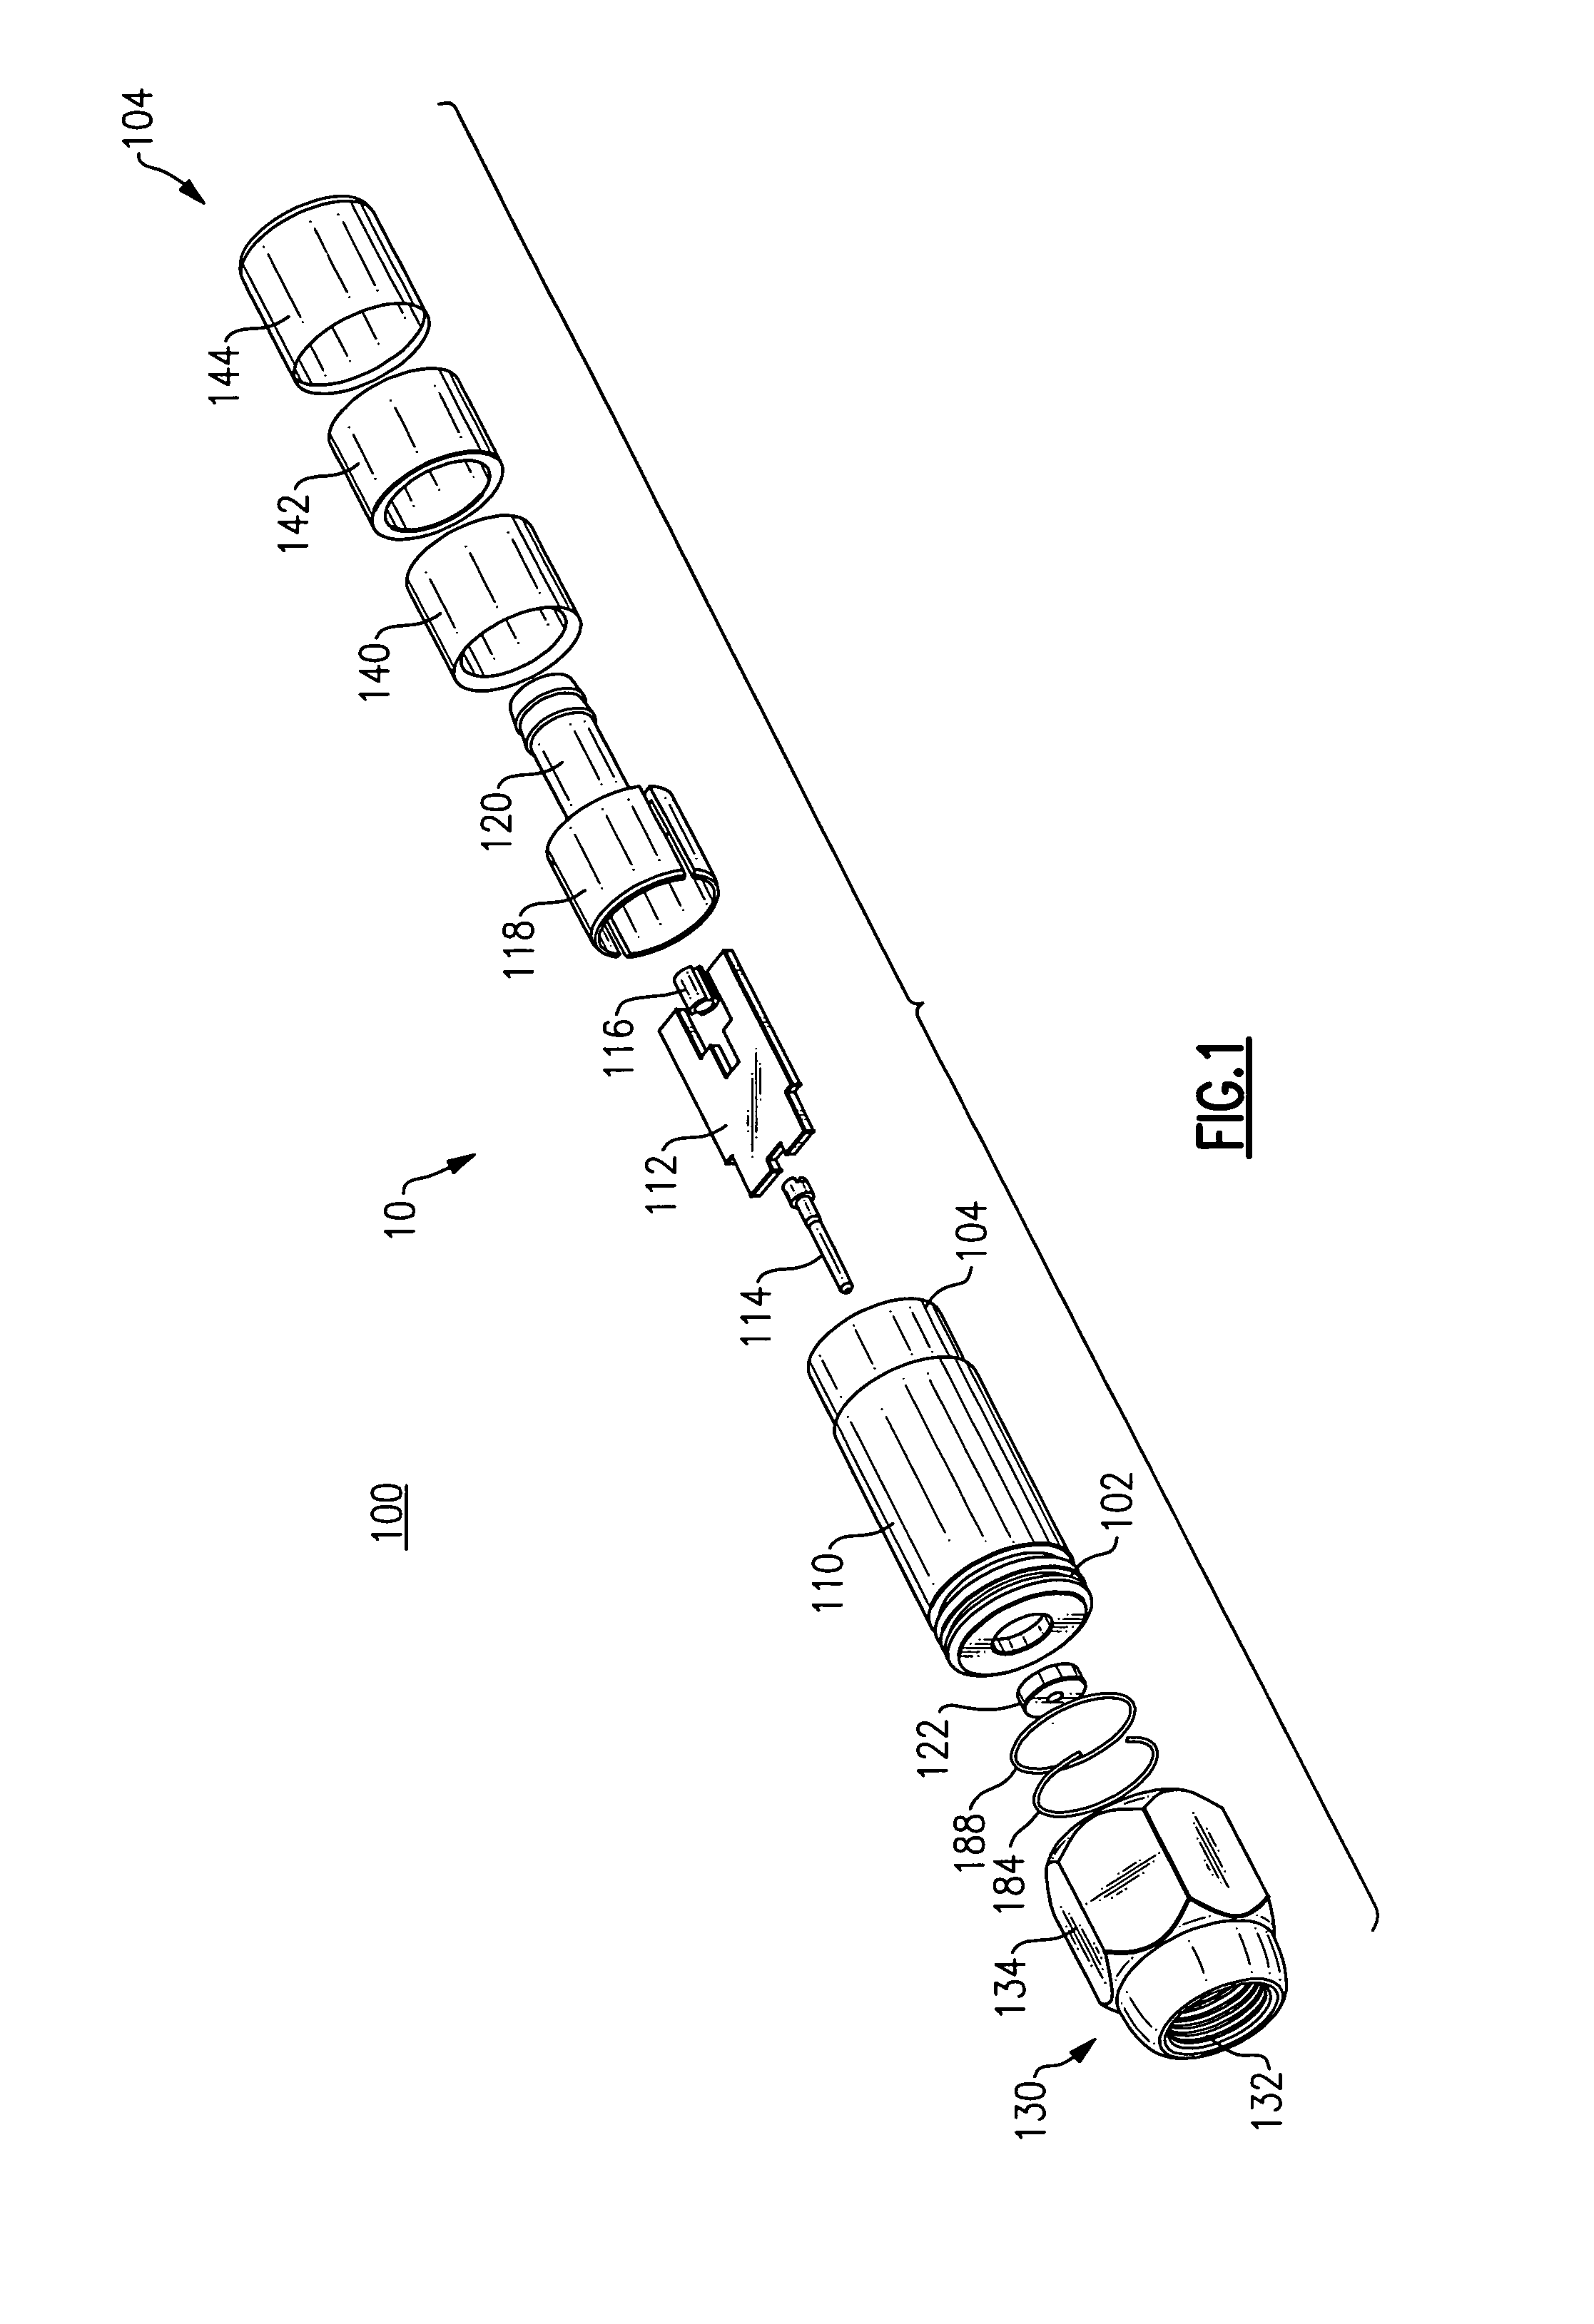 Integrated filter connector